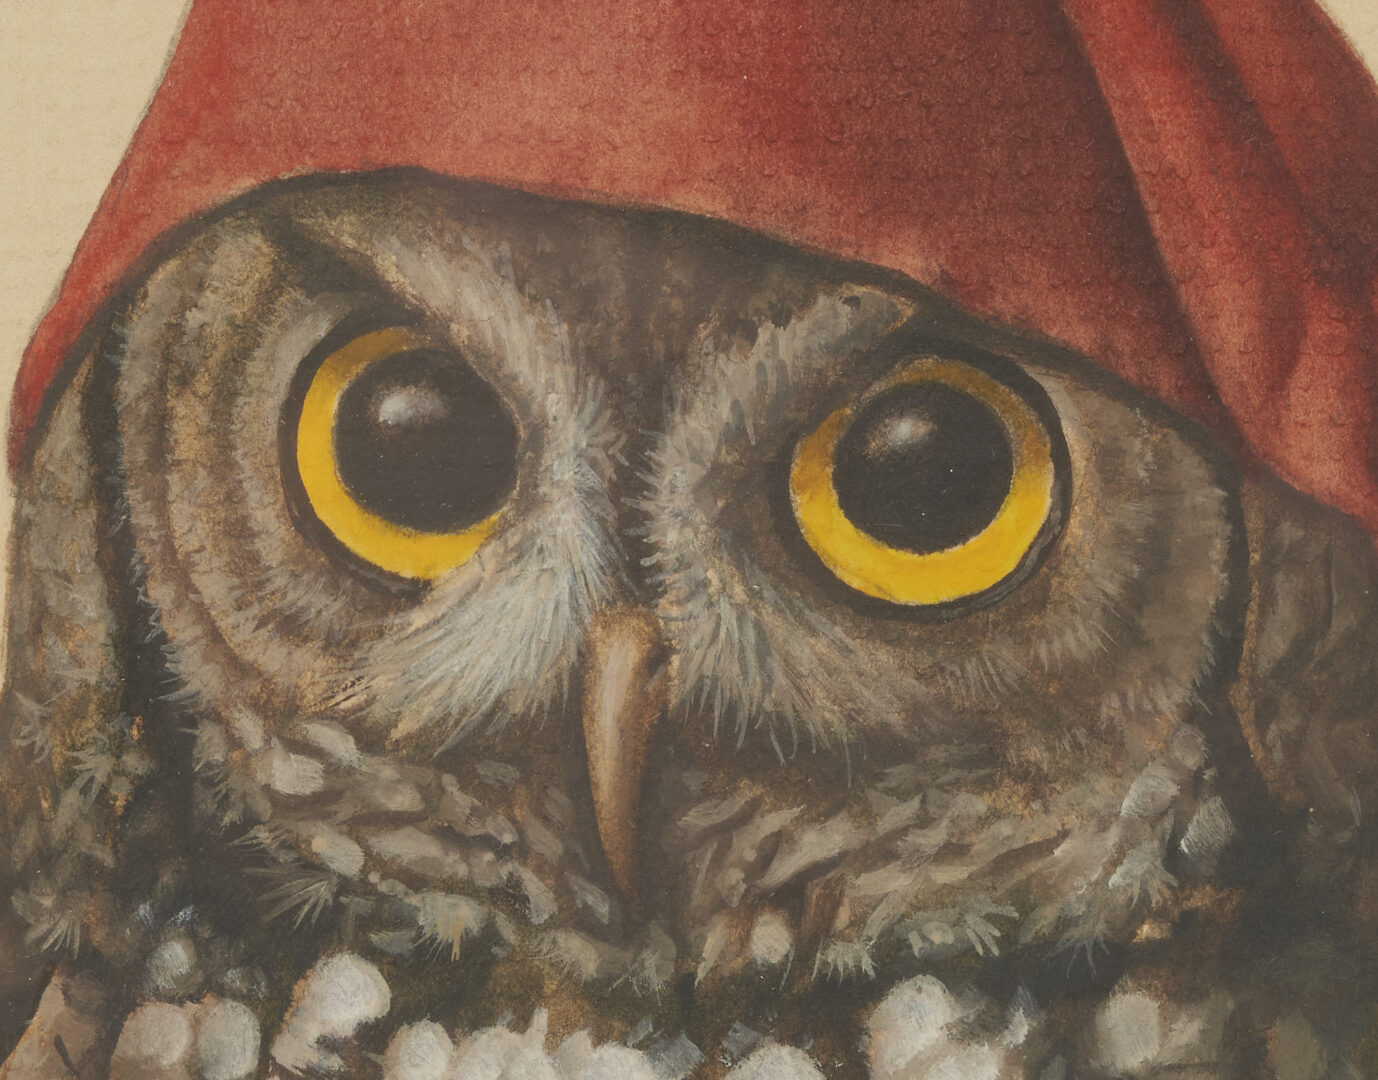 Lot 658: Werner Wildner Watercolor Painting, Owl in Red Cap, Illustration history